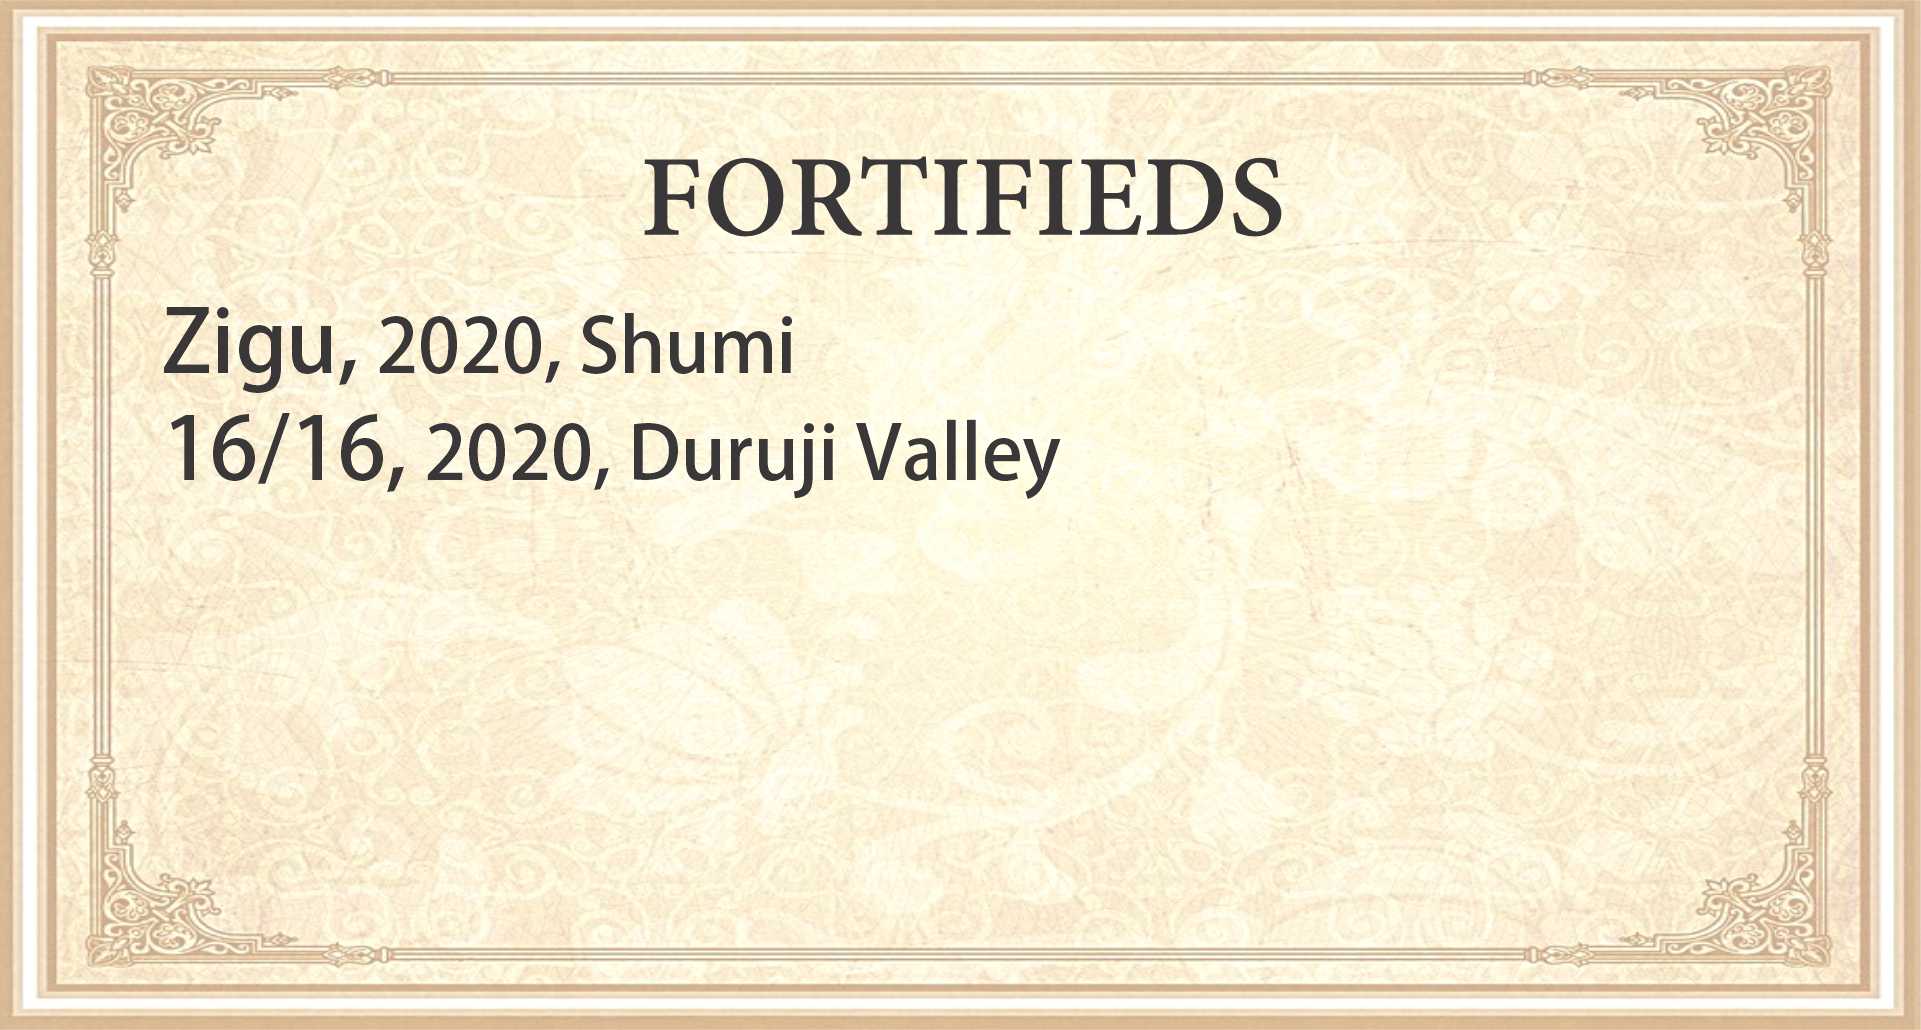 Fortifieds